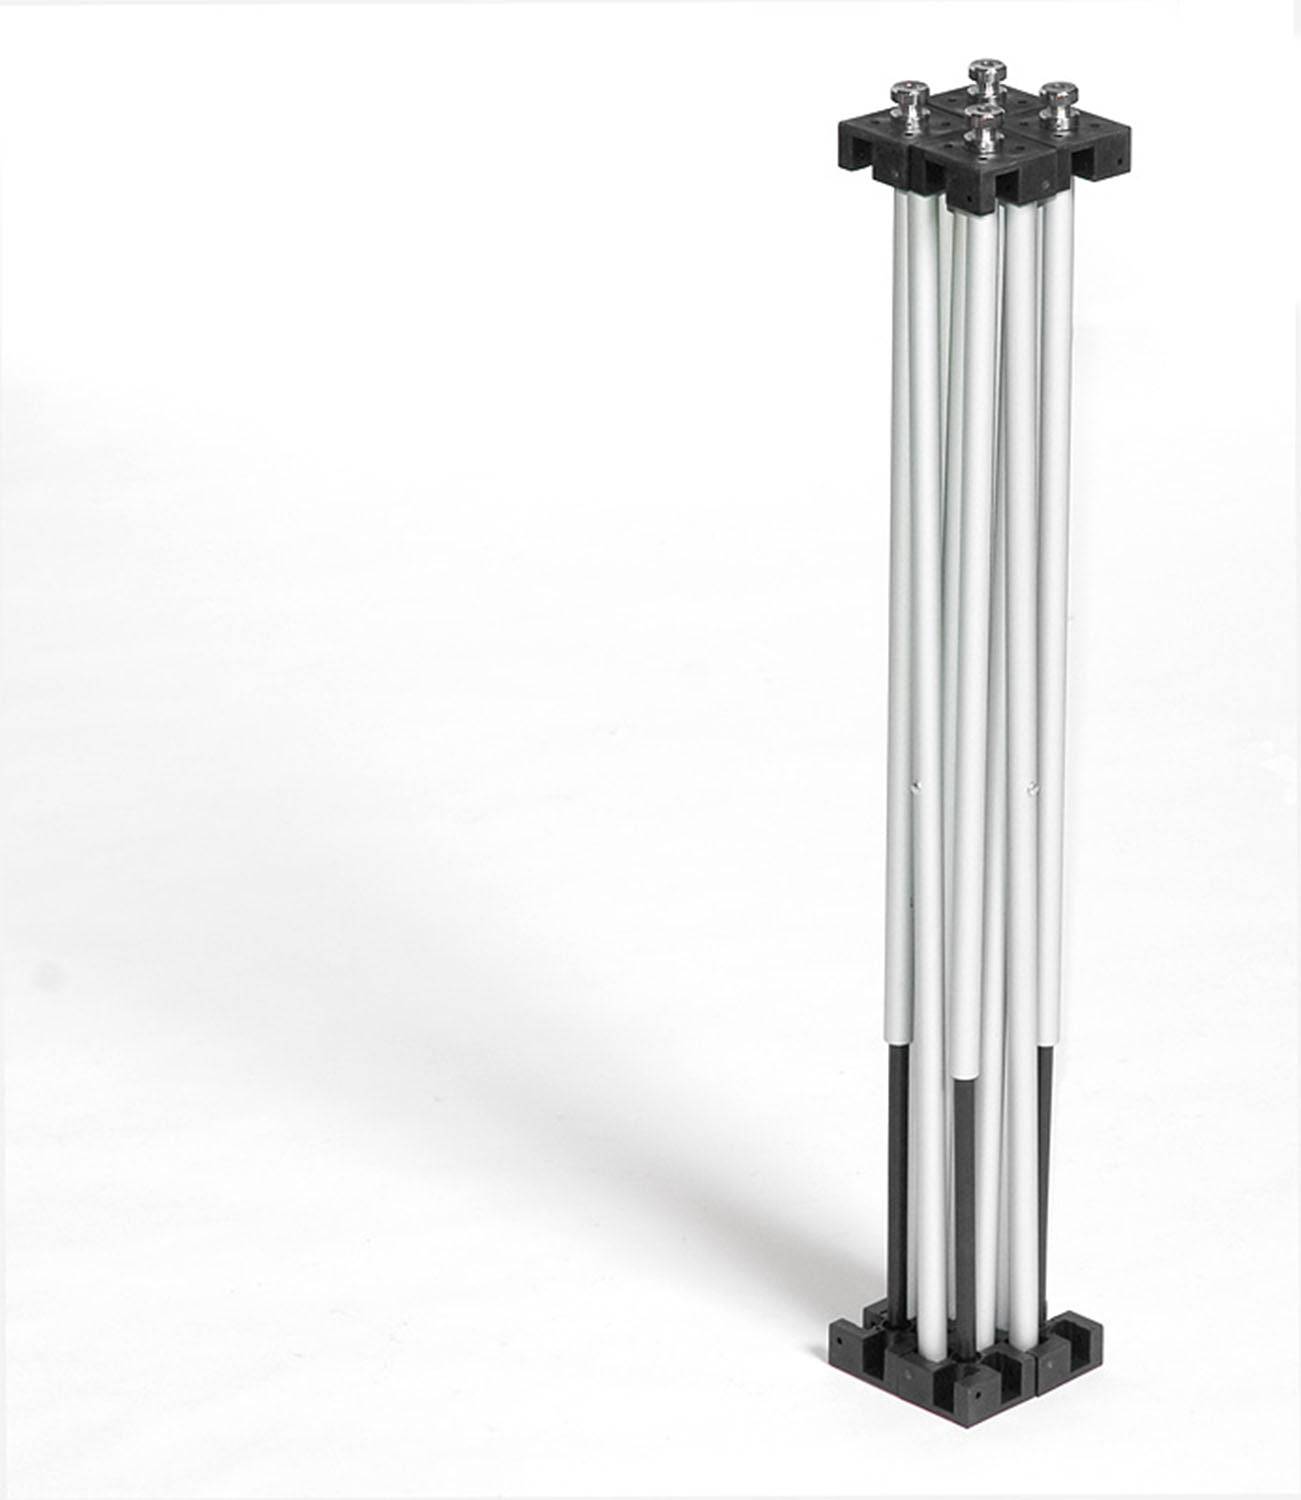 Intellistage IST3X16, 16 Inches High Equilateral Triangle Riser for 3 x 3 Feet Folding Stage Platforms - Hollywood DJ